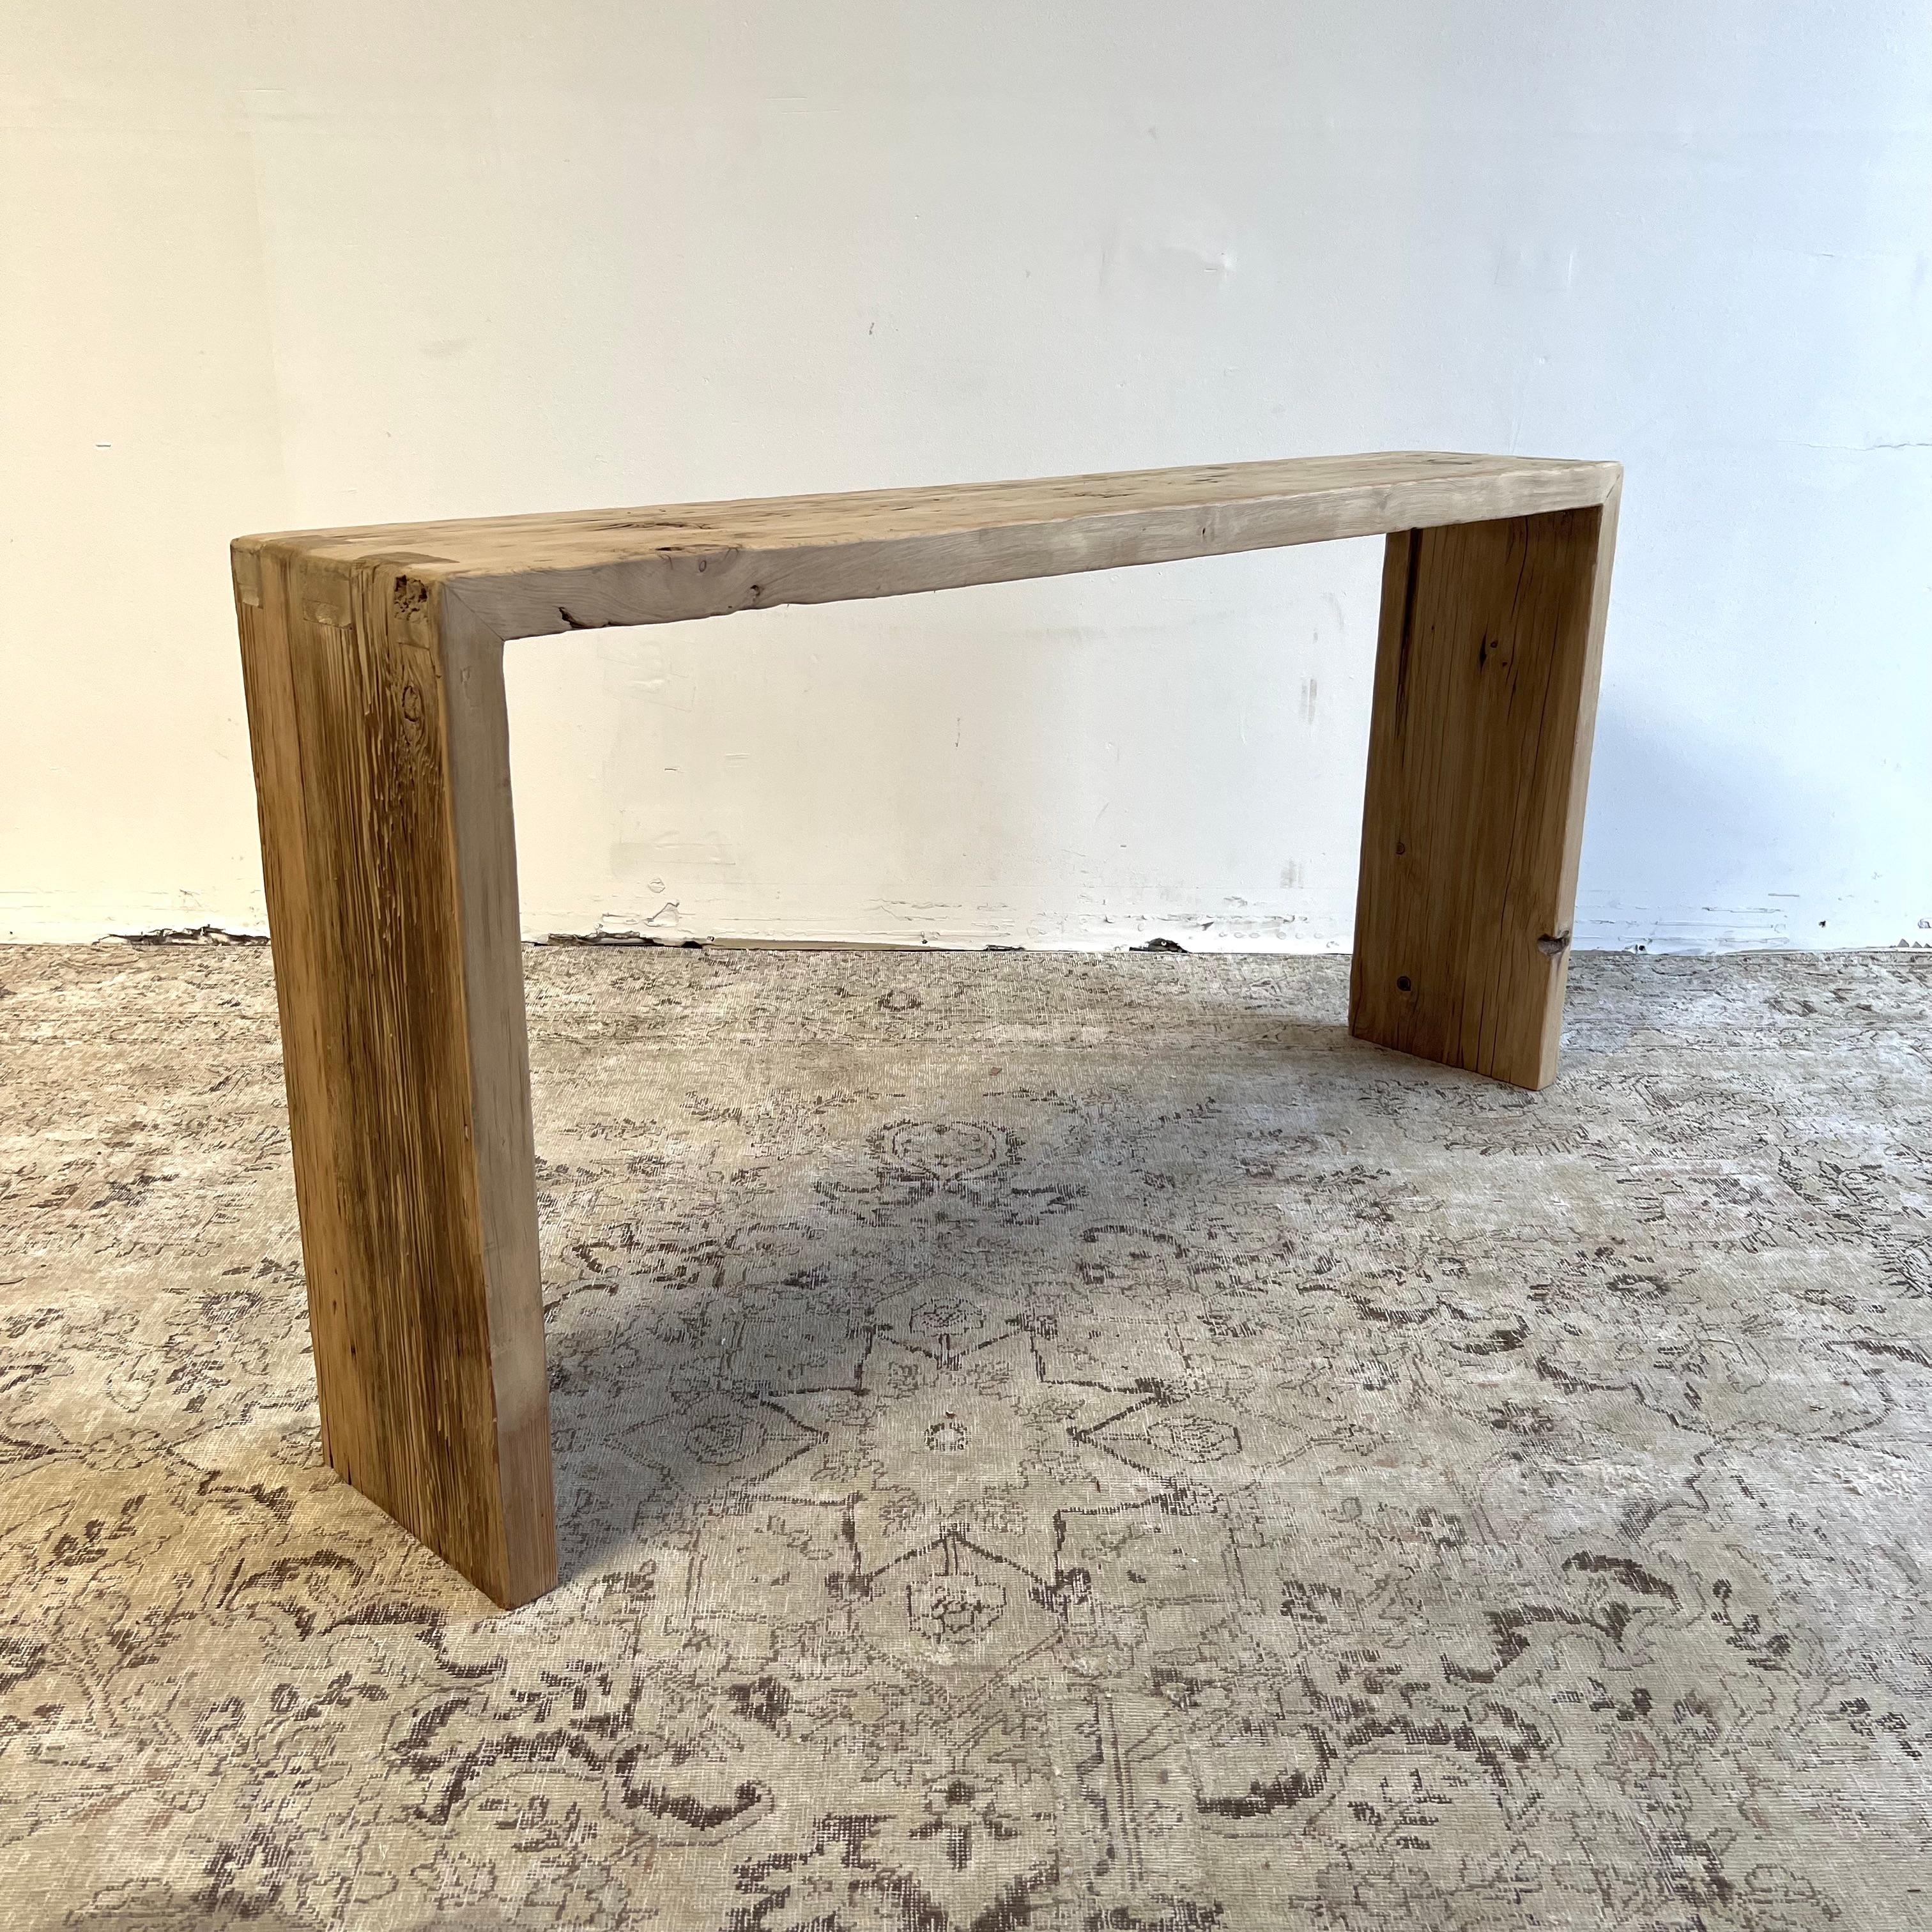 Custom reclaimed elm wood console table.
Made from vintage reclaimed elm wood. Beautiful antique patina, with weathering and age, these are solid and sturdy ready for daily use, use as a entry table, sofa table or console in a dining room. Great in